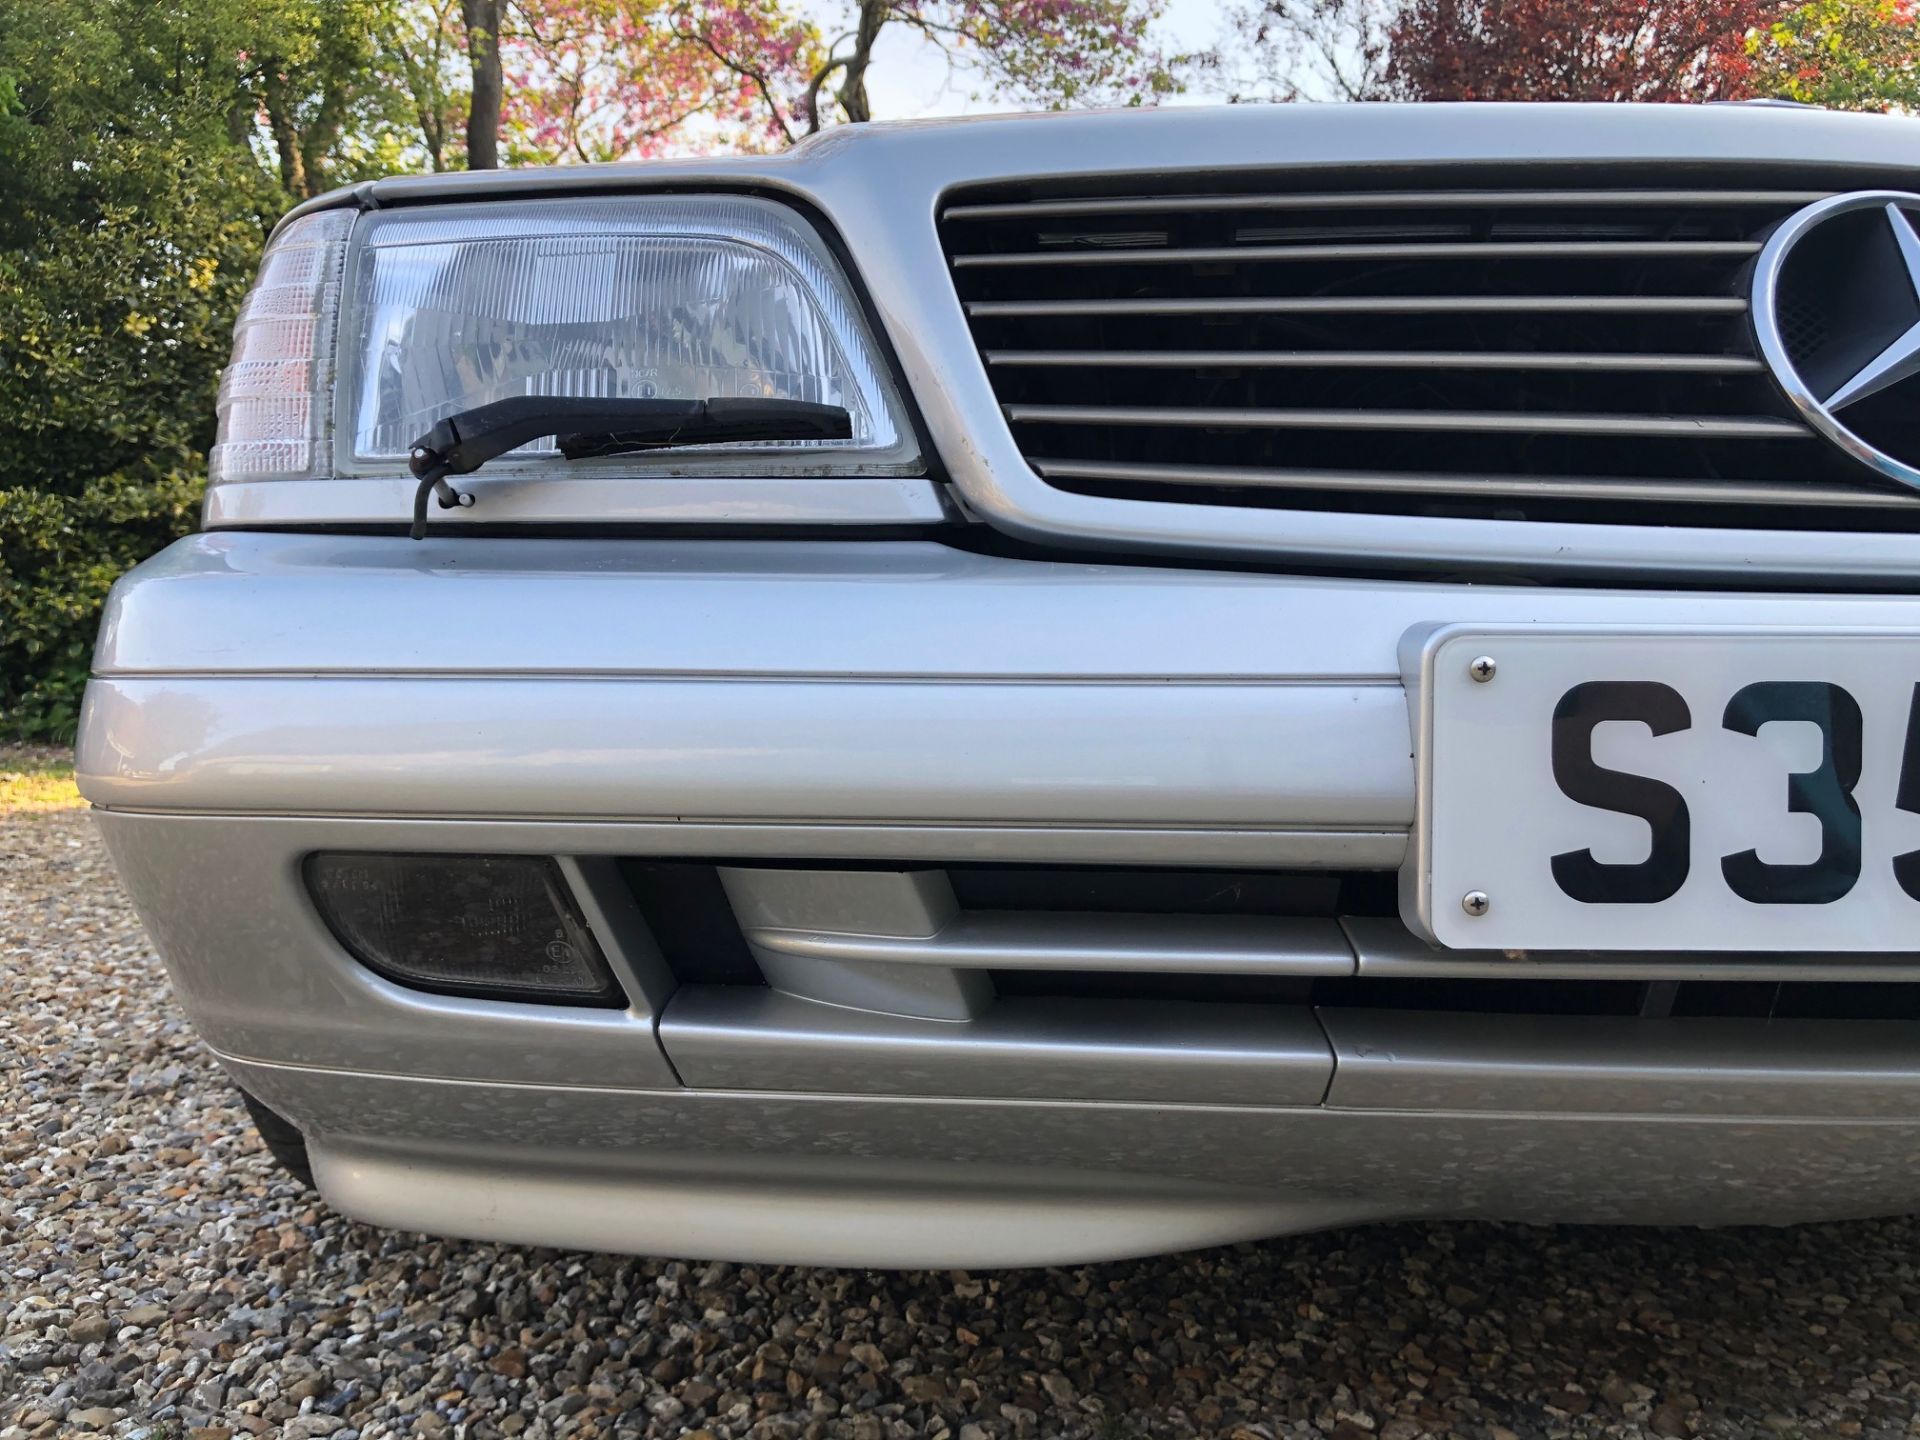 A 1998 Mercedes-Benz 320 SL Registration number S352 LFJ MOT expired March 2020 Metallic silver with - Image 20 of 57